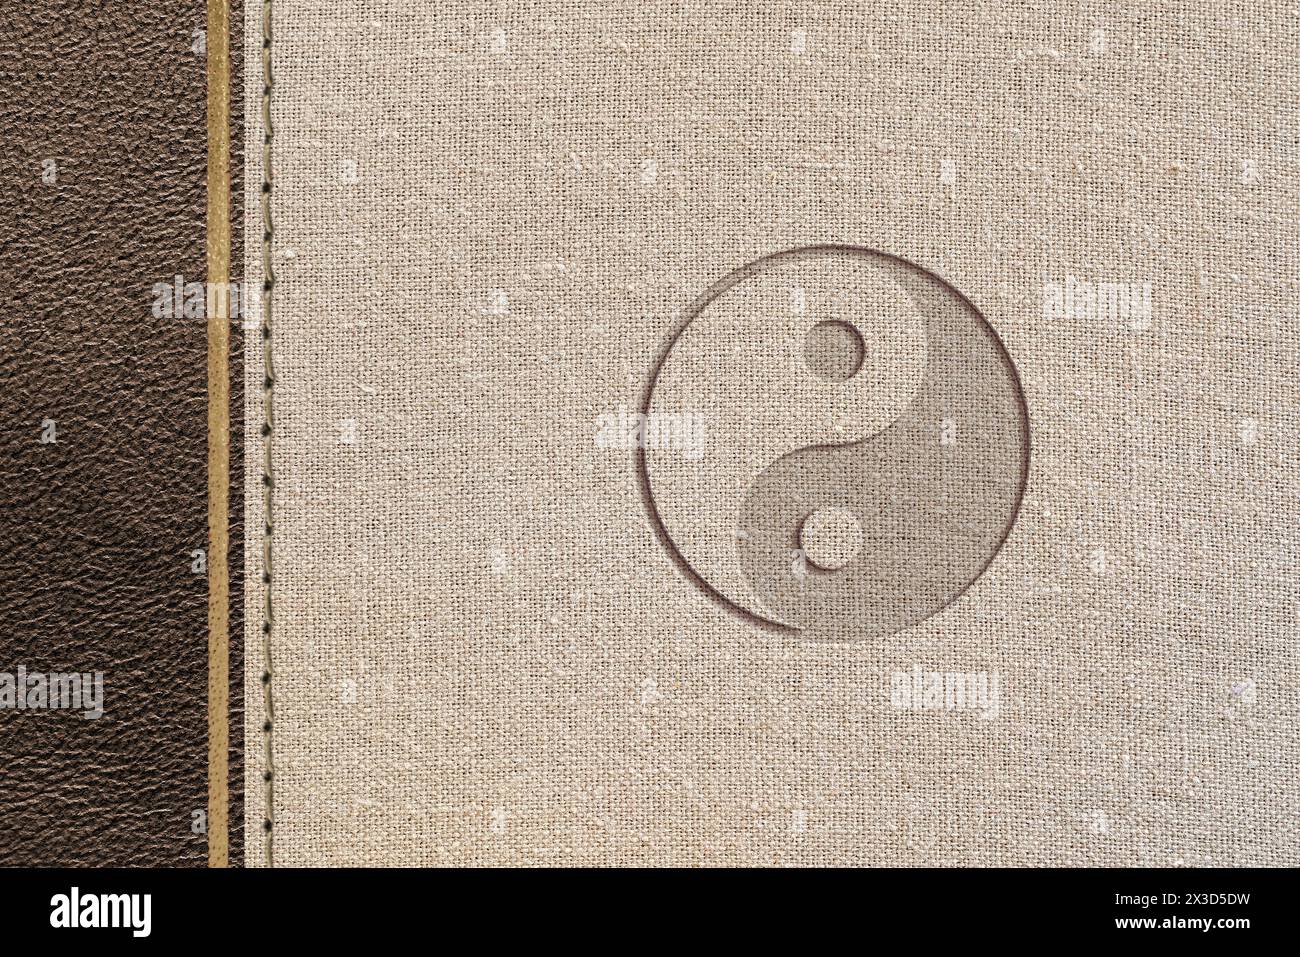 Brown taoist philosophy design with leather and fabric texture with yin-yang engraved. Top view. Stock Photo